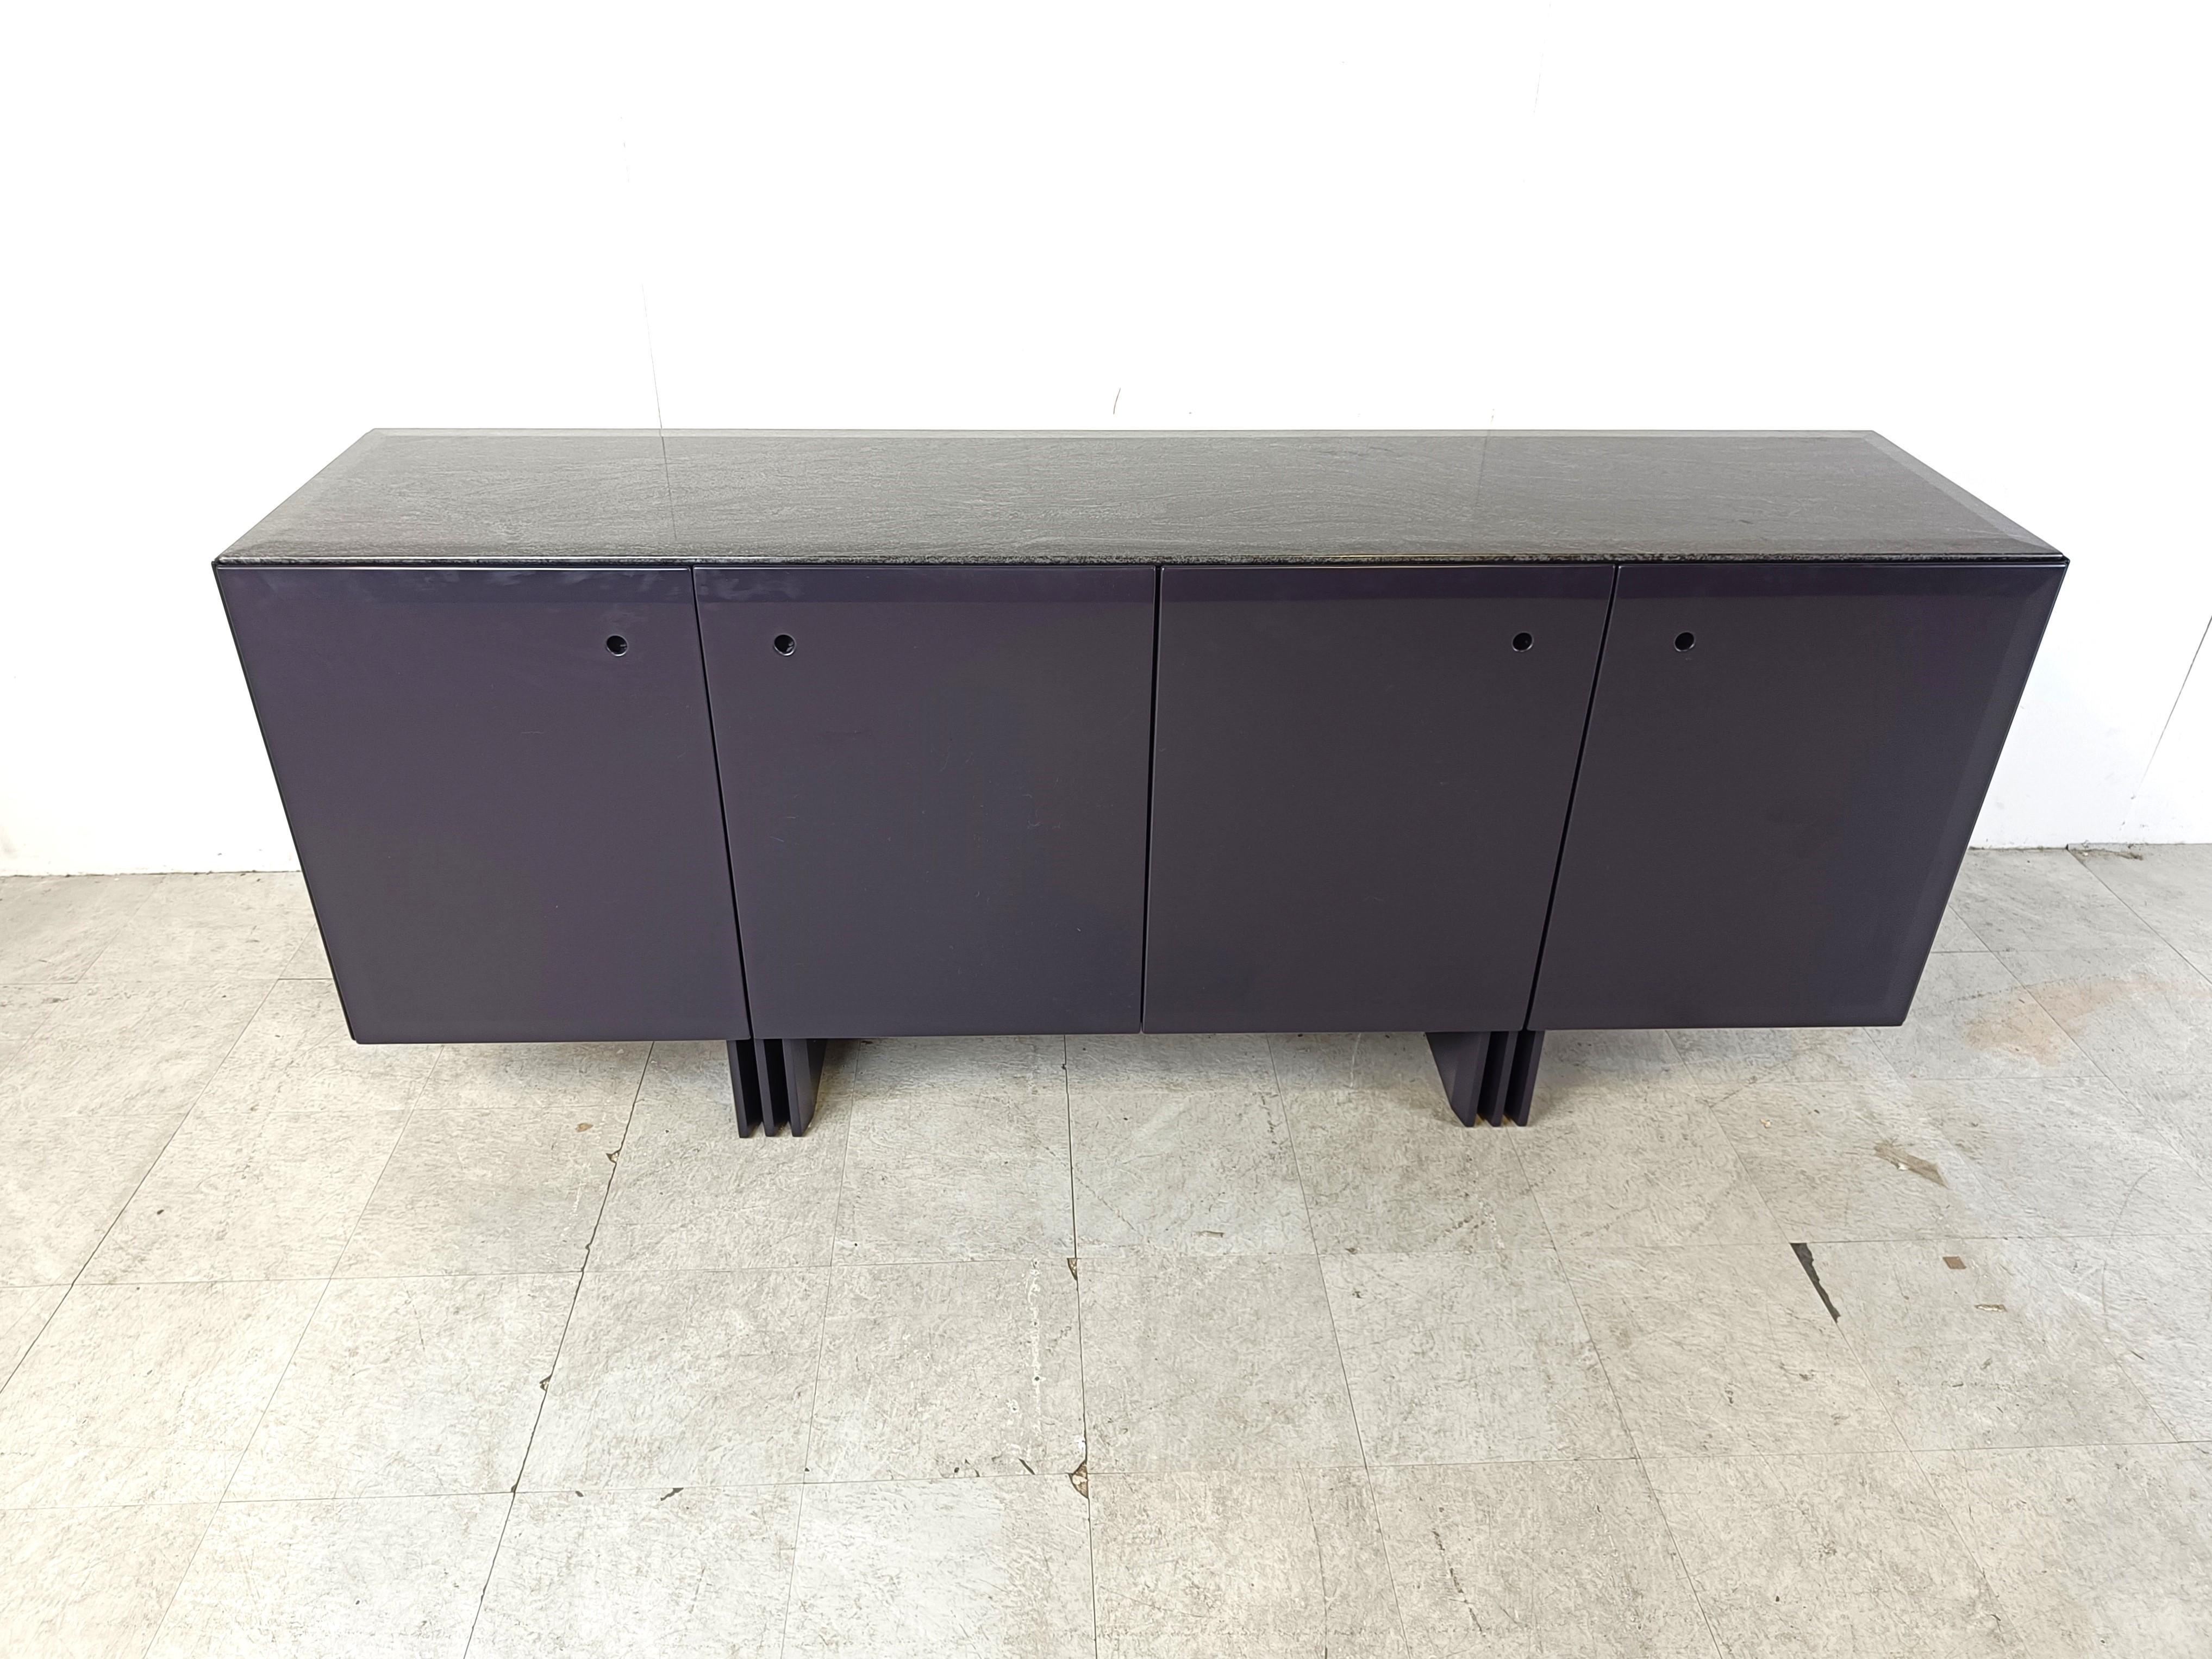 Vintage dark blue wooden sideboard with a grey marble top and glass shelving.

Beautiful timeless piece which offers plenty of storage space.

Very well made

1980s - Belgium

Dimensions:
Lenght: 200cm/78.74